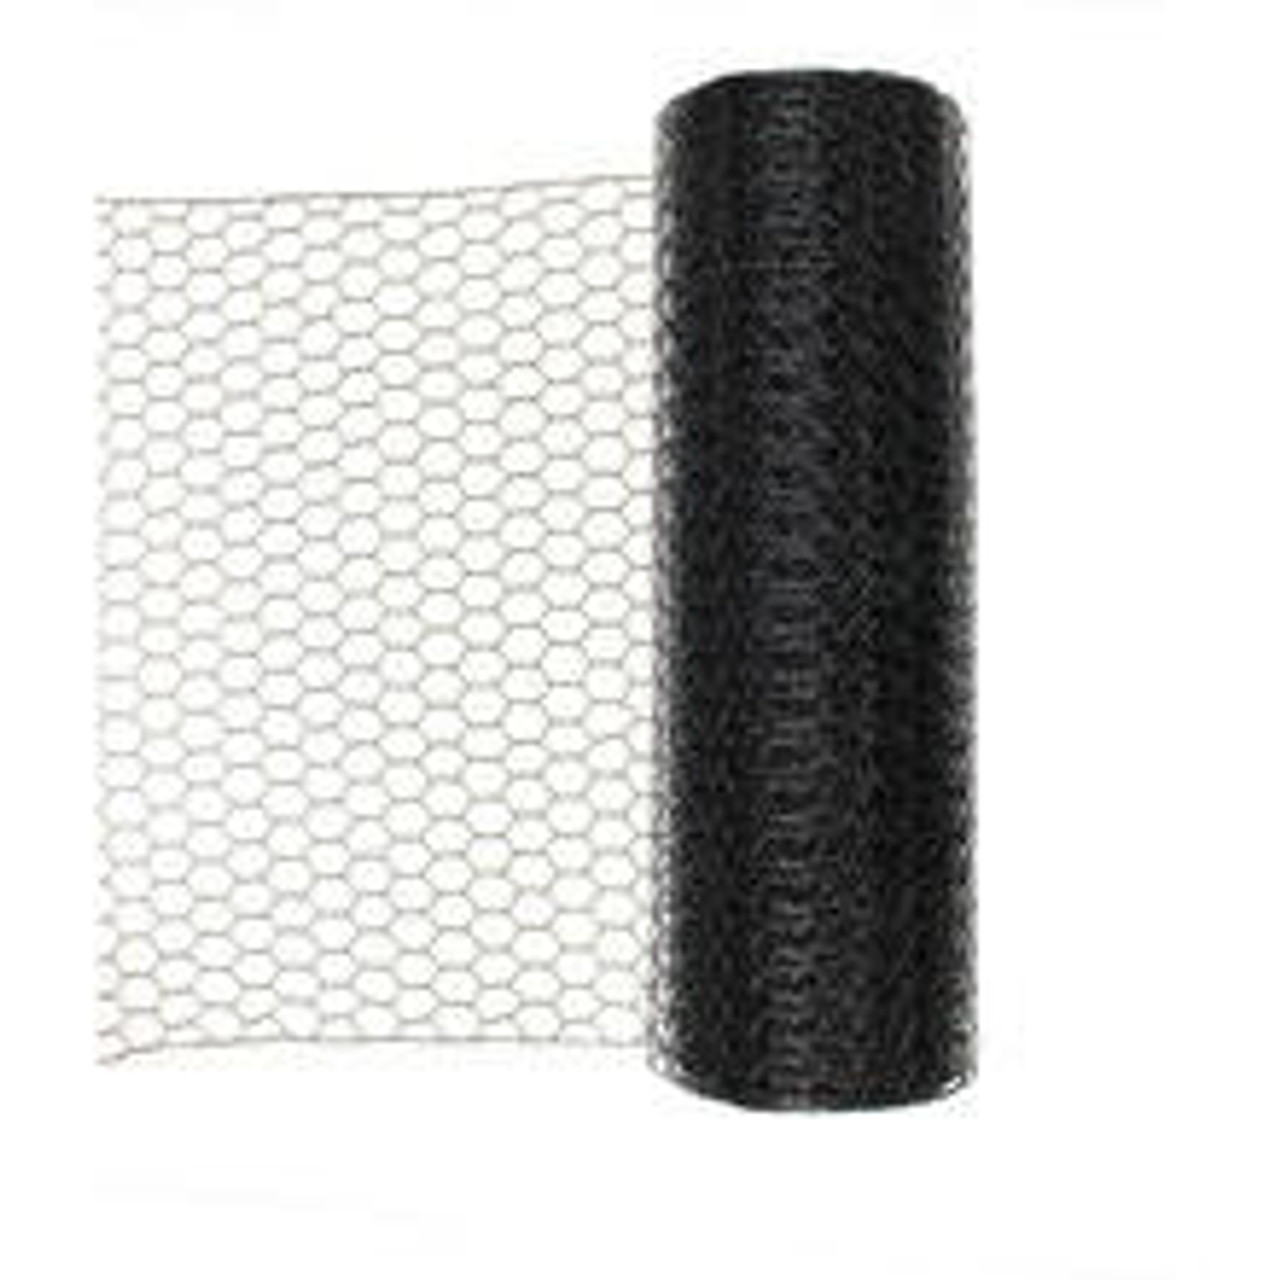 1 Galvanized & PVC Coated Chicken Wire (Hex Fencing)